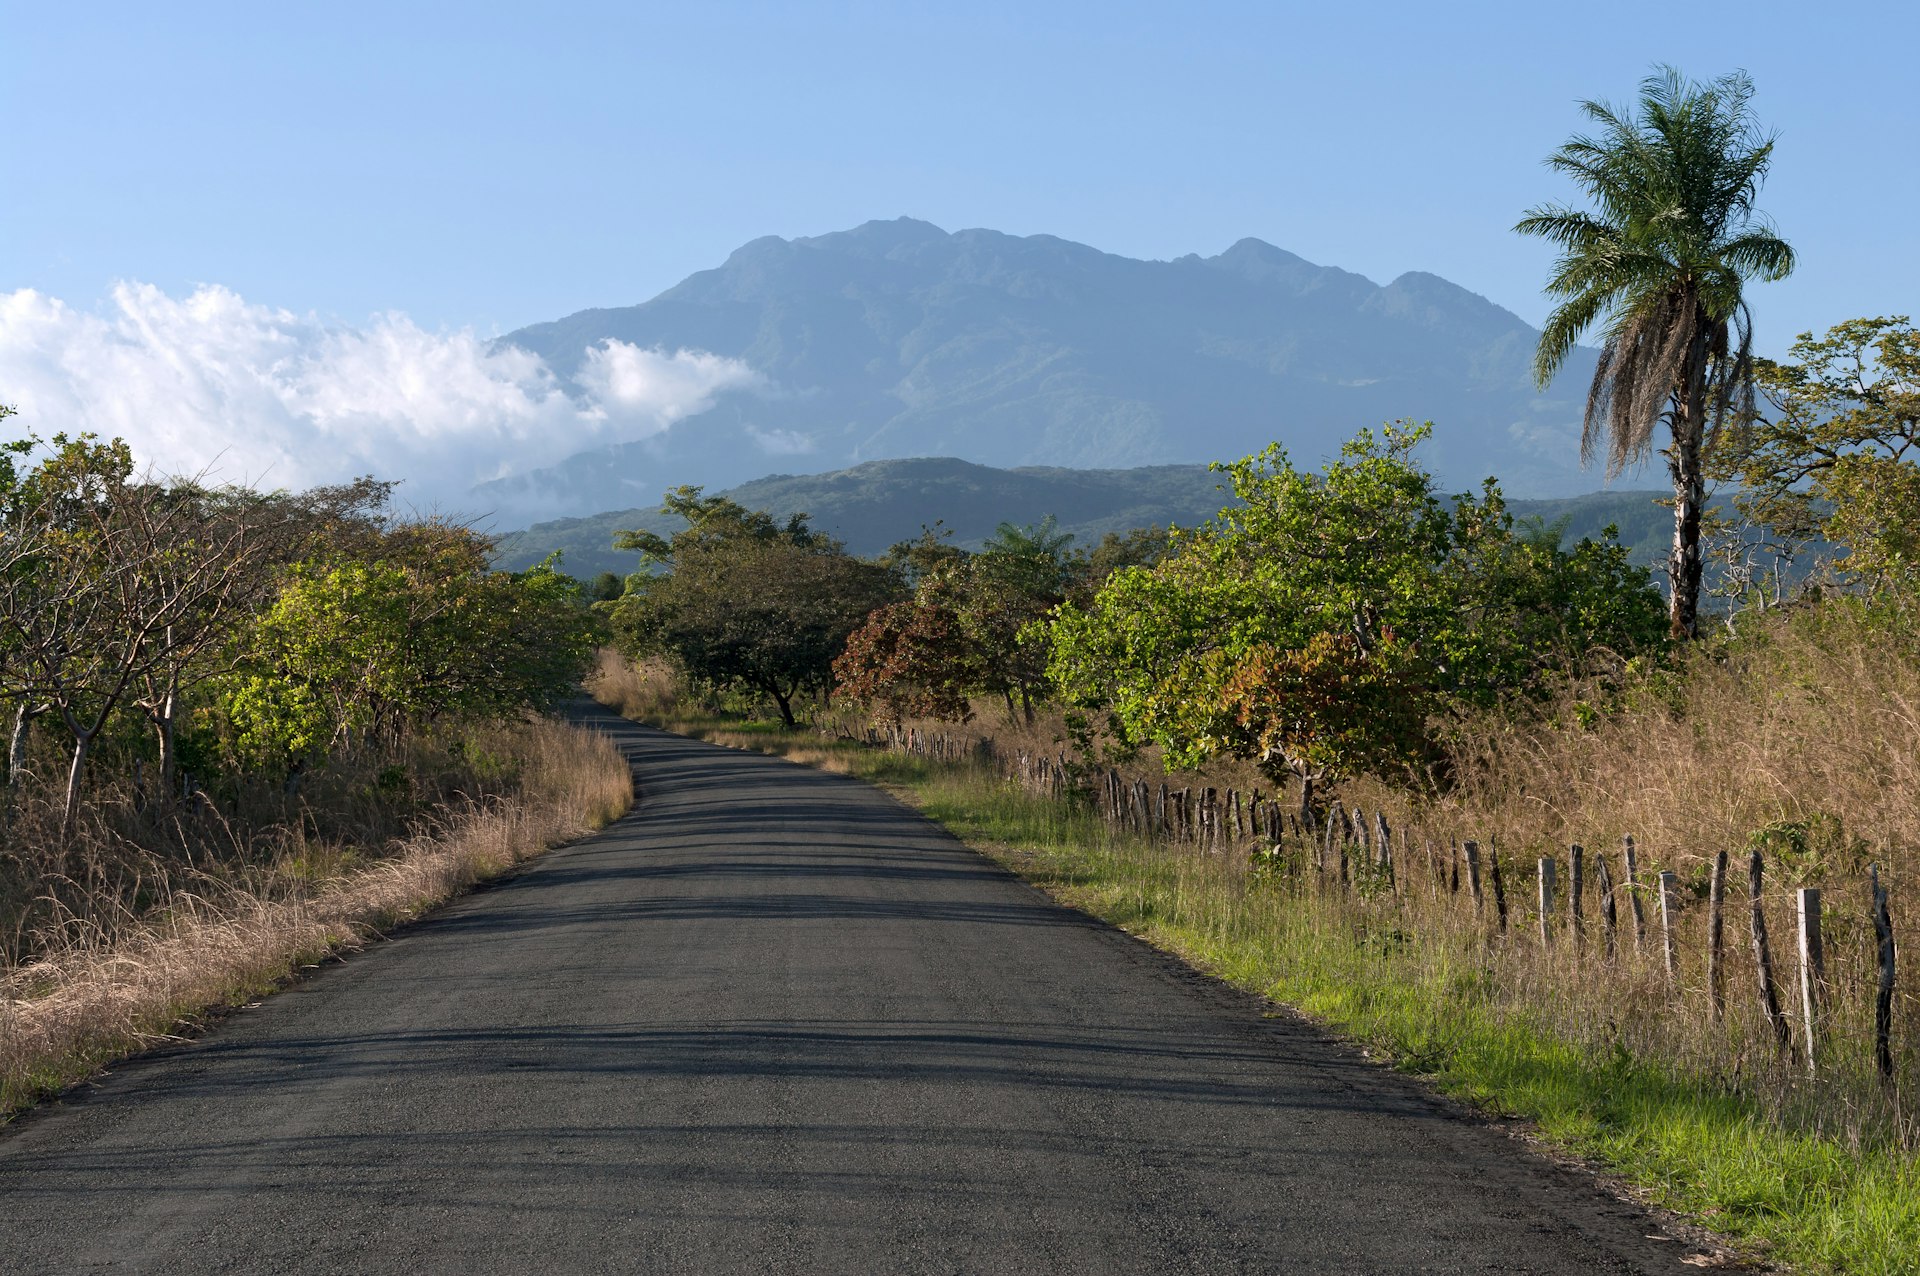 Rural road in western Panama, with 'Volcan Baru' in the background.